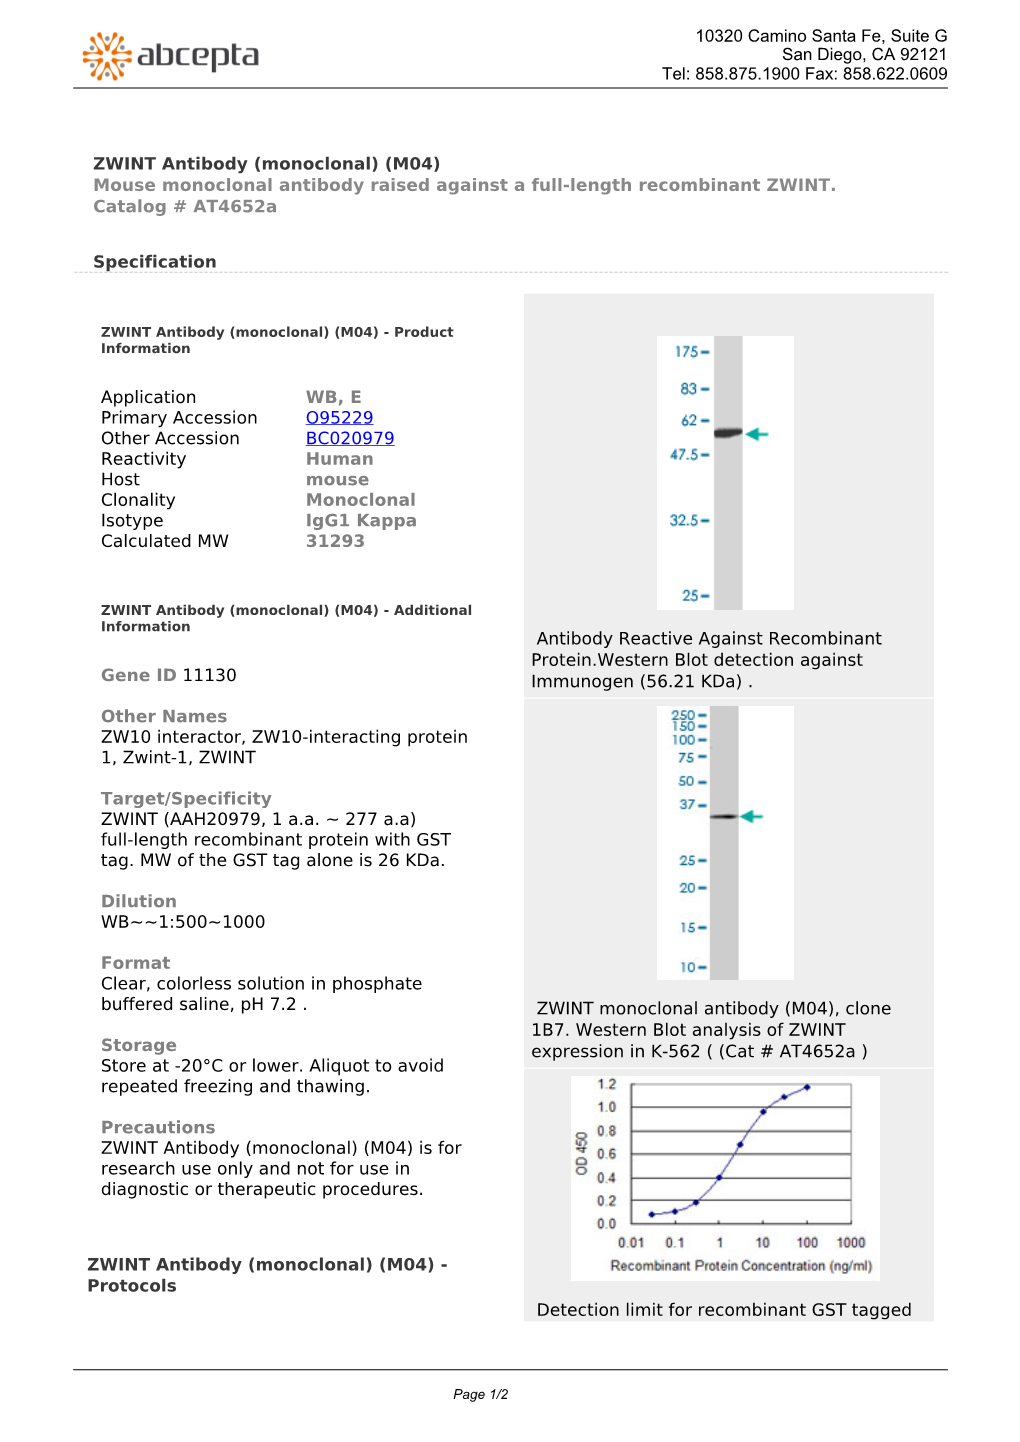 ZWINT Antibody (Monoclonal) (M04) Mouse Monoclonal Antibody Raised Against a Full-Length Recombinant ZWINT